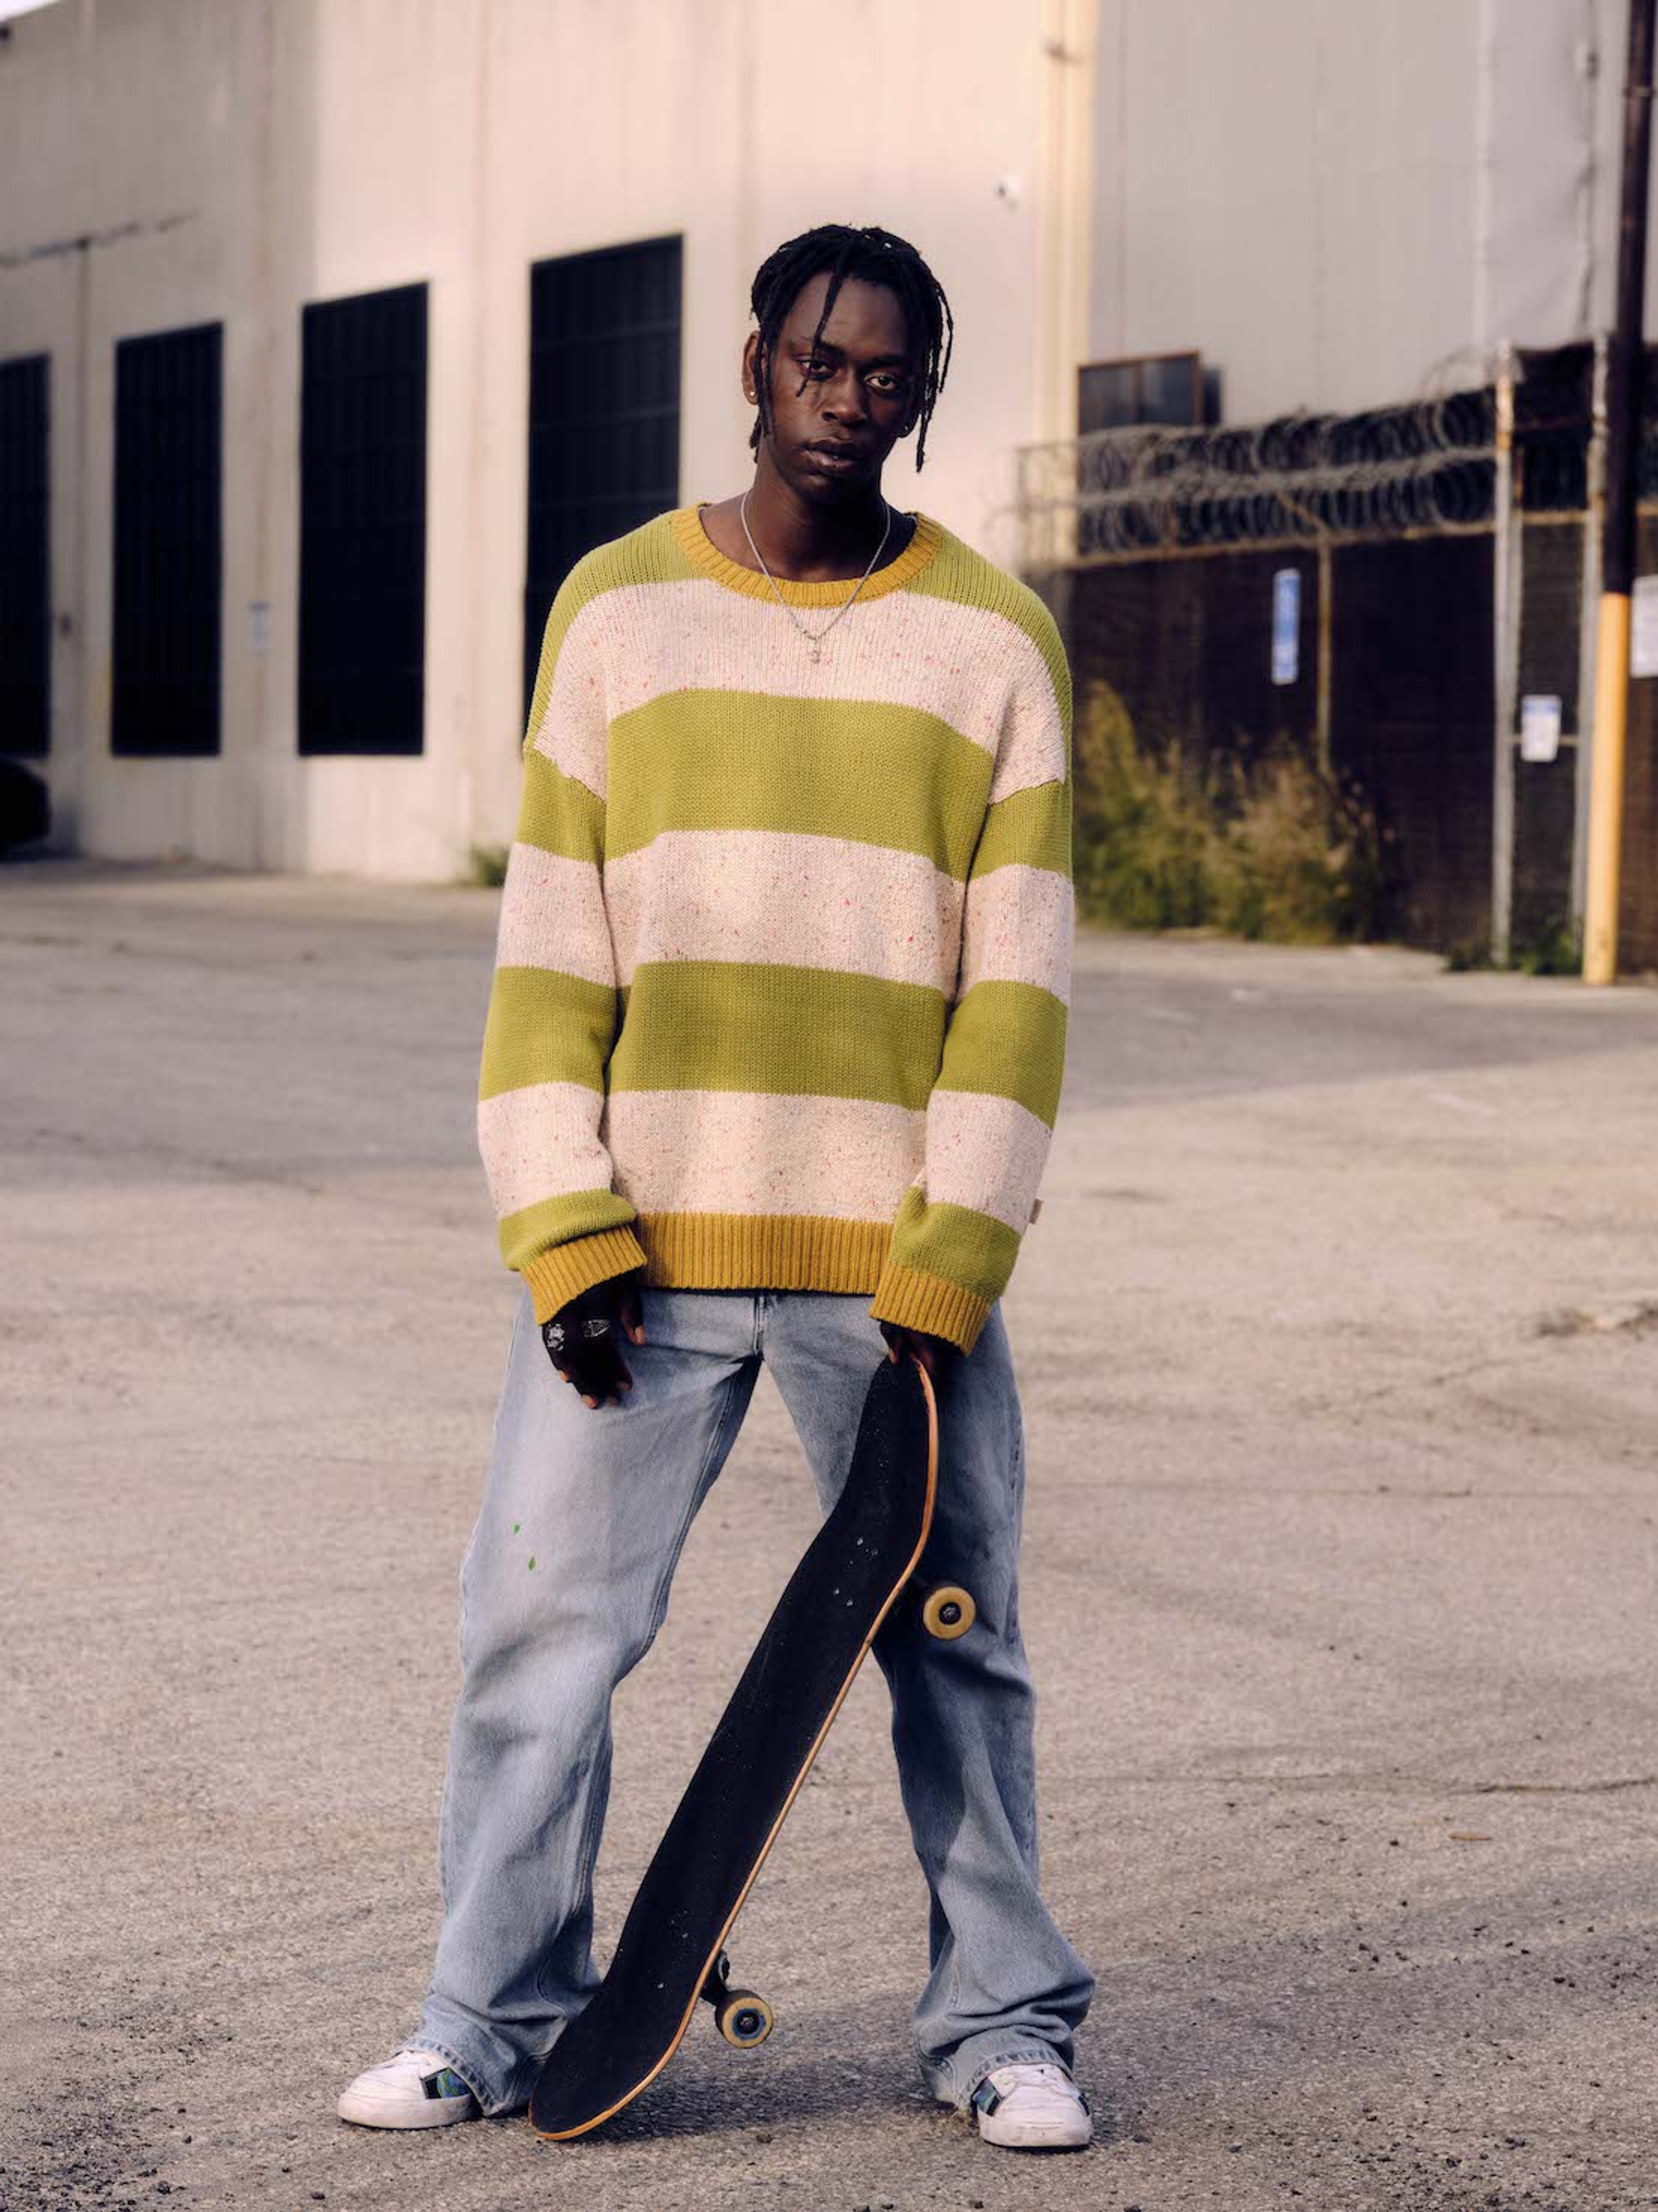 photo of an african-american man in striped sweater and light unspun jeans holding a skateboard